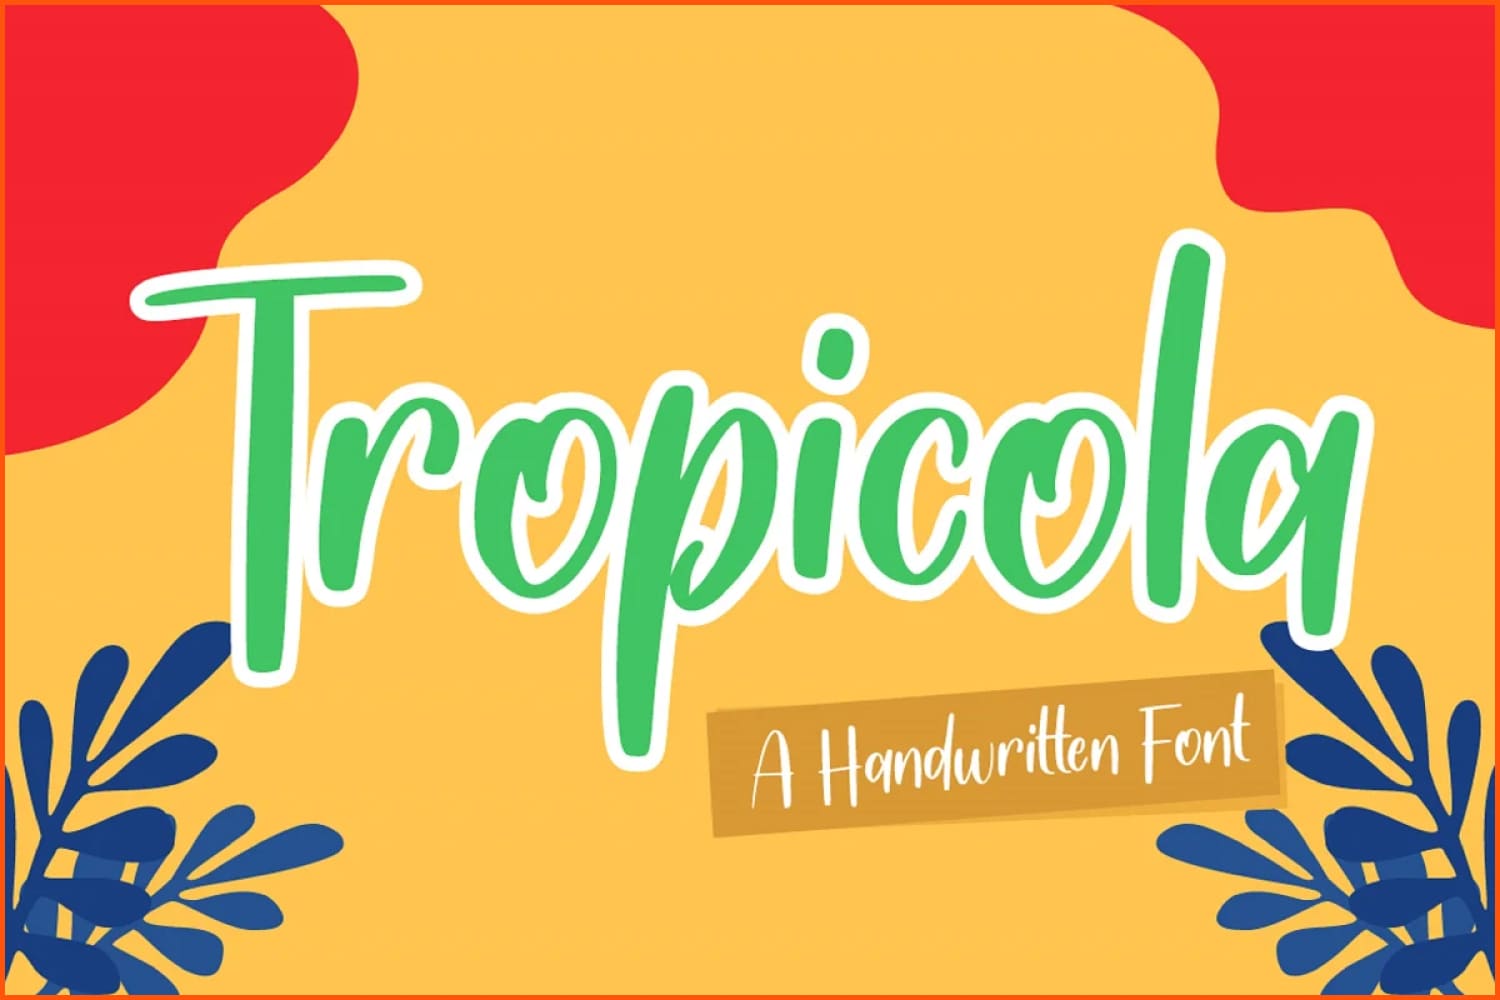 The word Tropicola in green on a yellow background.